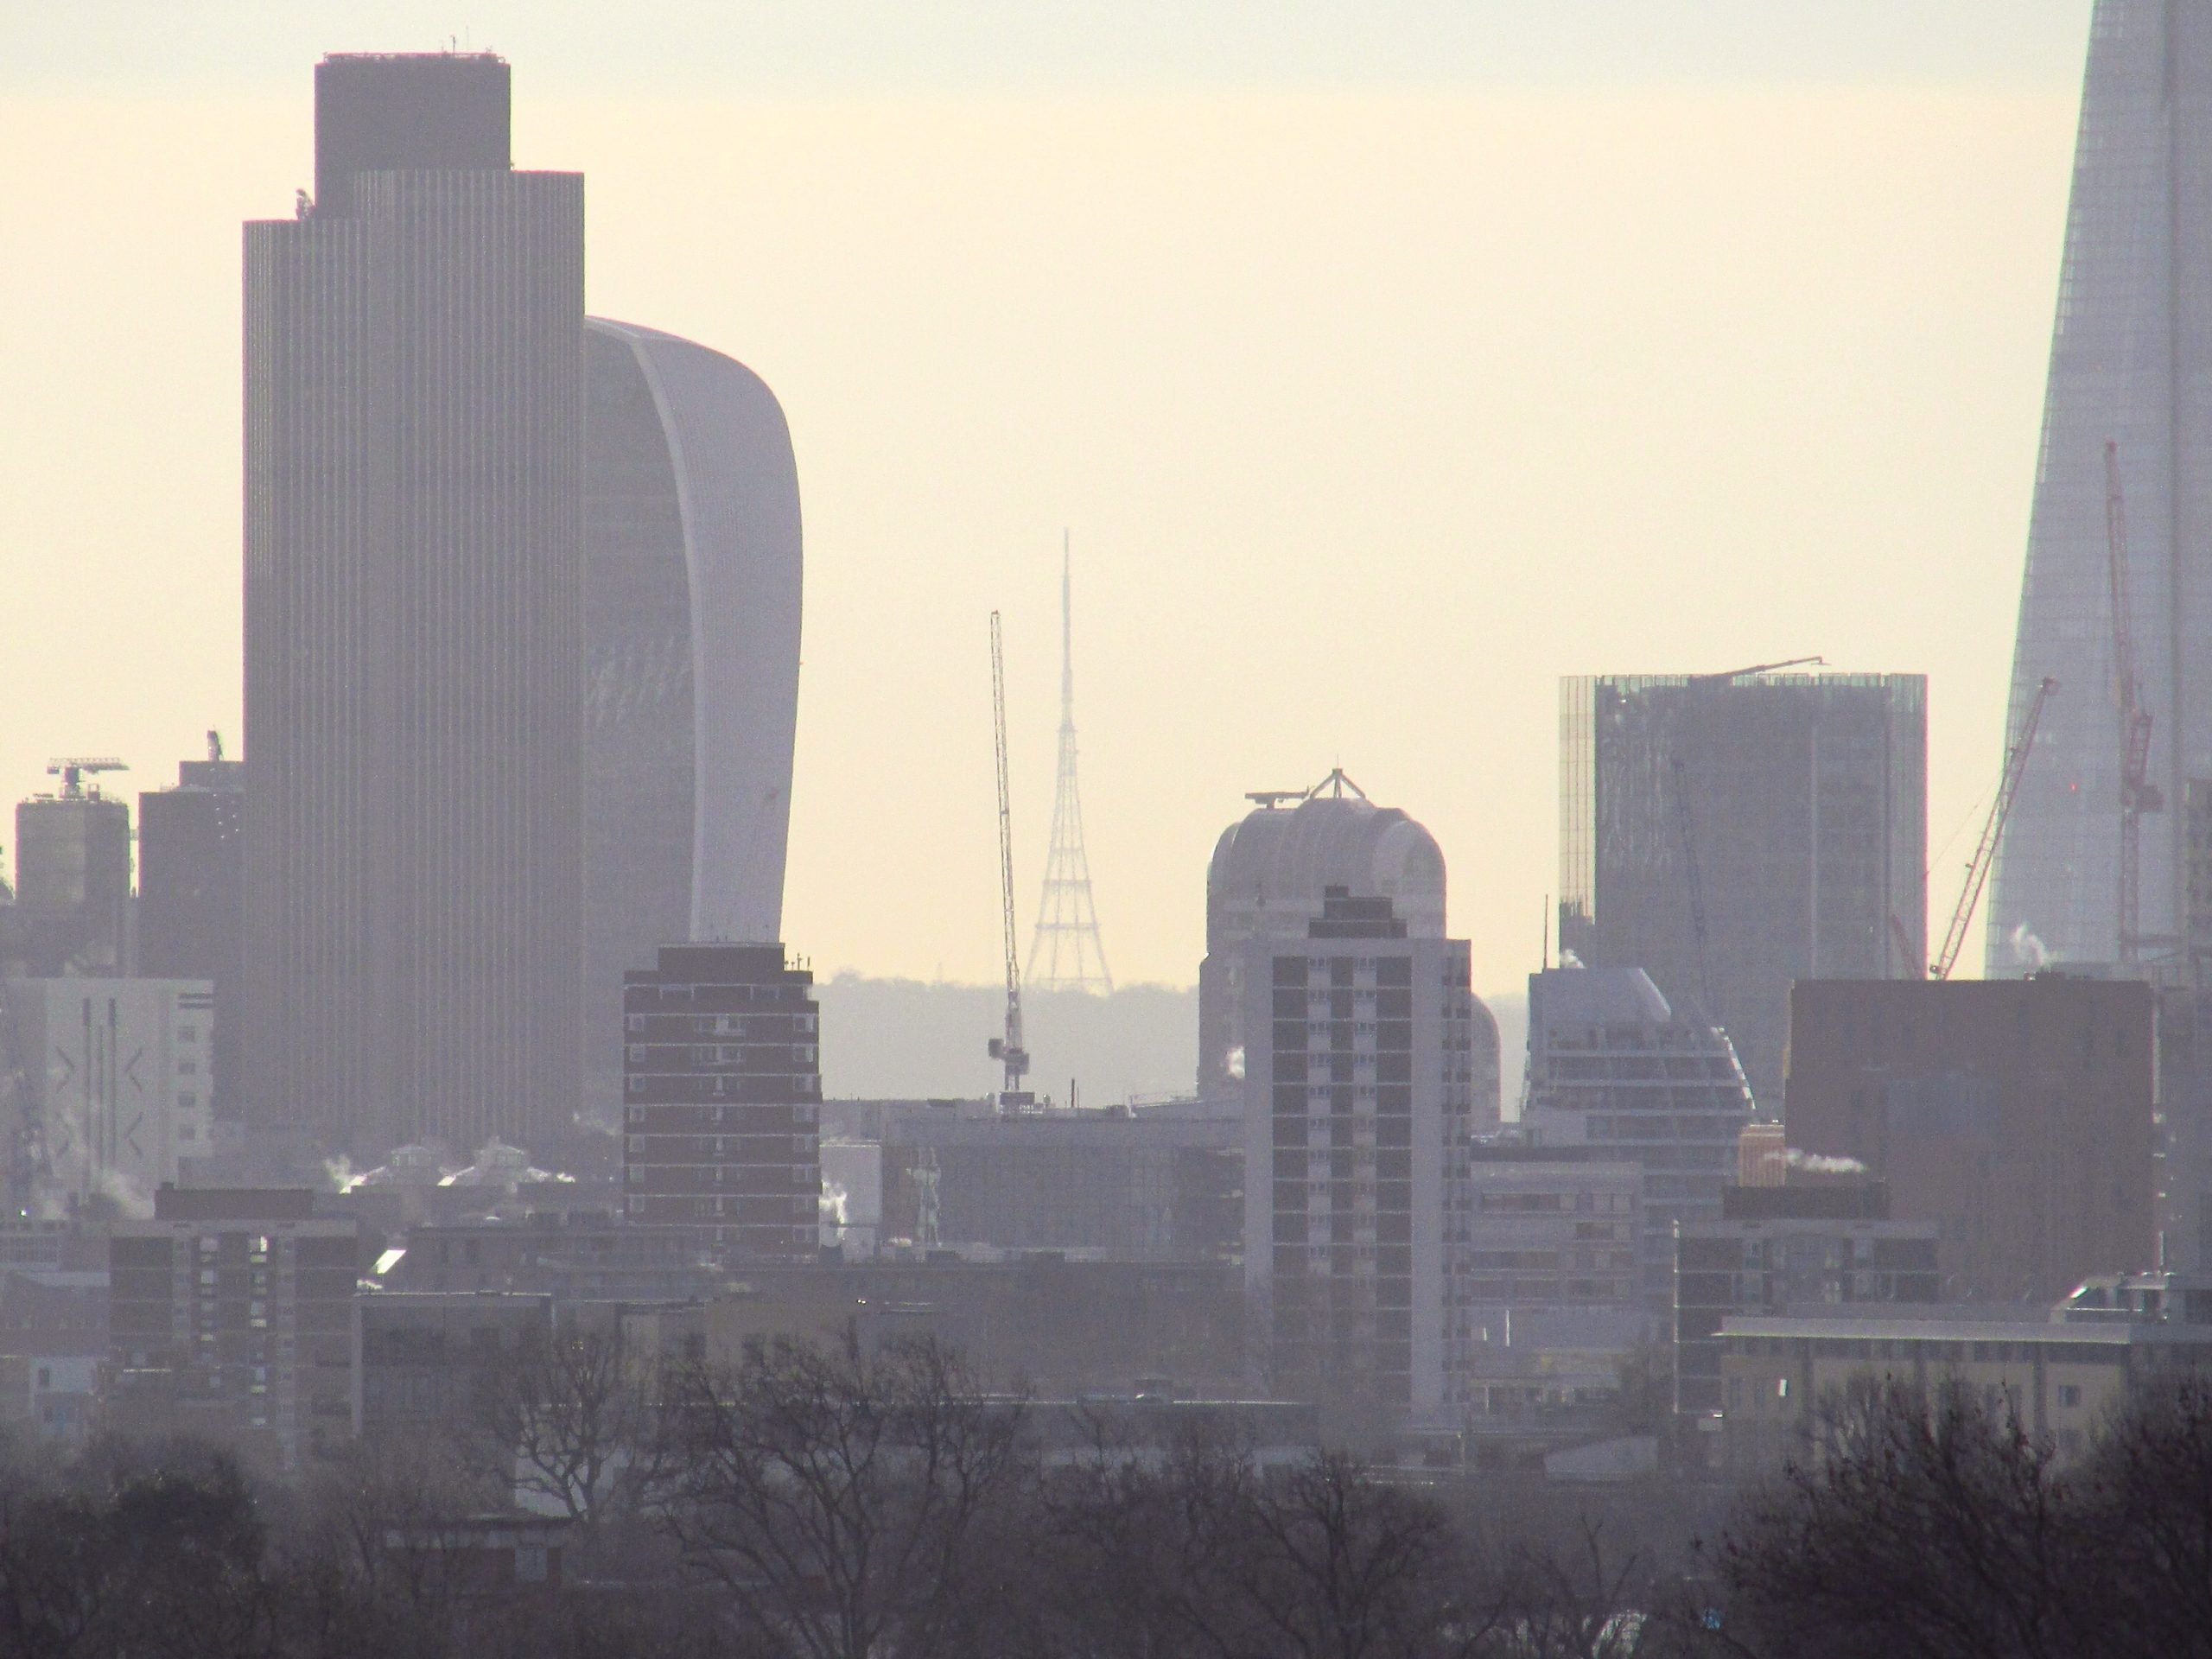 Air pollution sits over London, with several tall buildings silouhetted